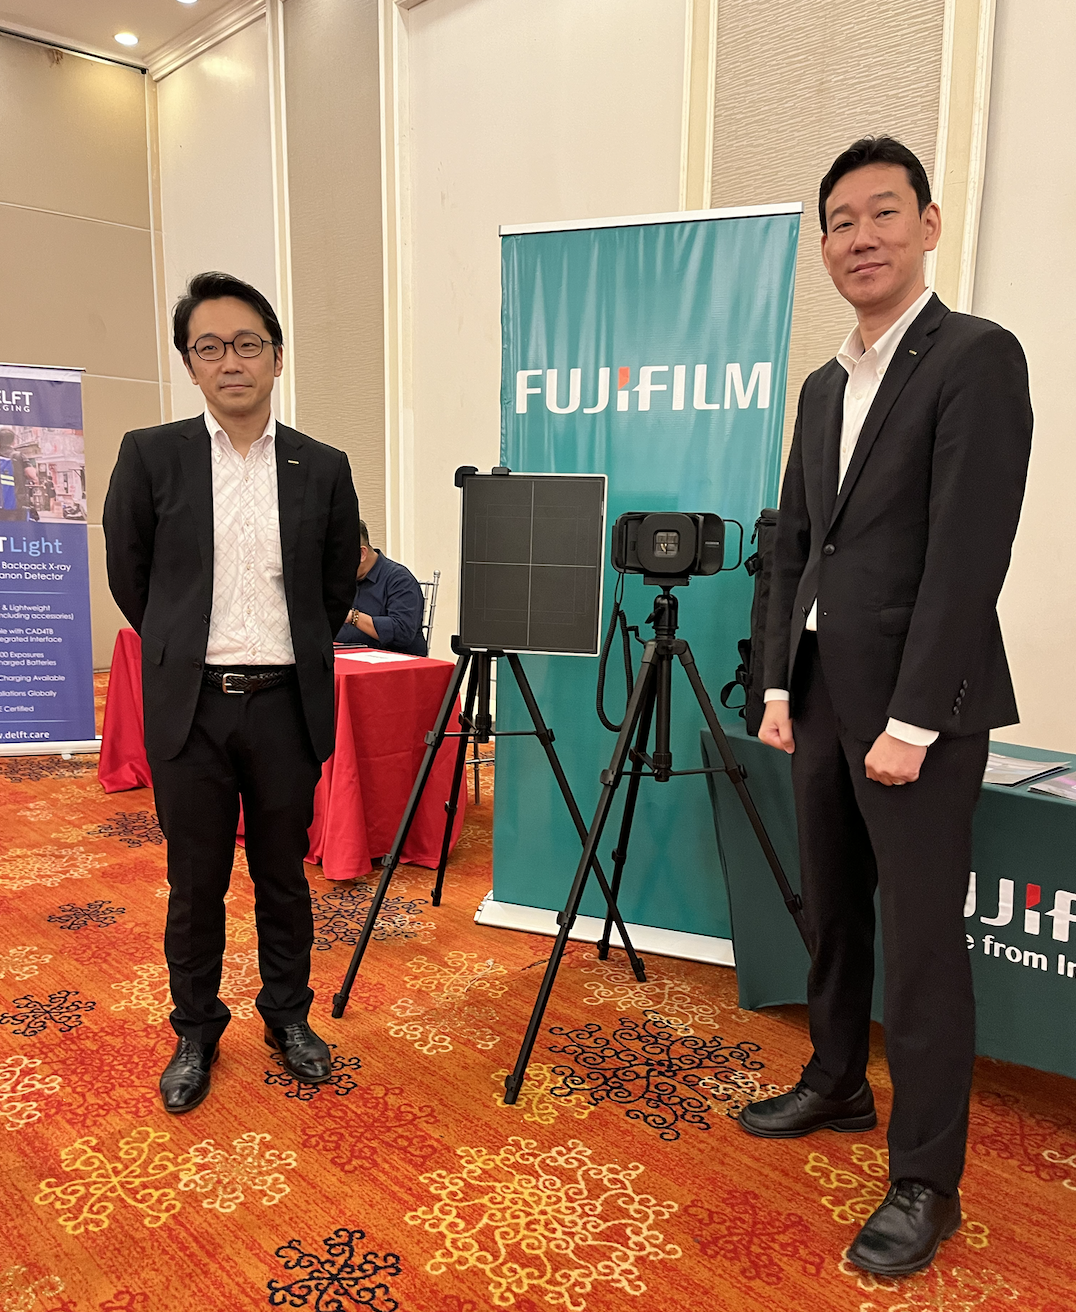 FUJIFILM representatives, Takashi Miyako, Vice President & General Manager for Medical systems Division, and Masahiro Uehara, President, are pictured alongside the FDR Xair - a cutting-edge portable X-ray system